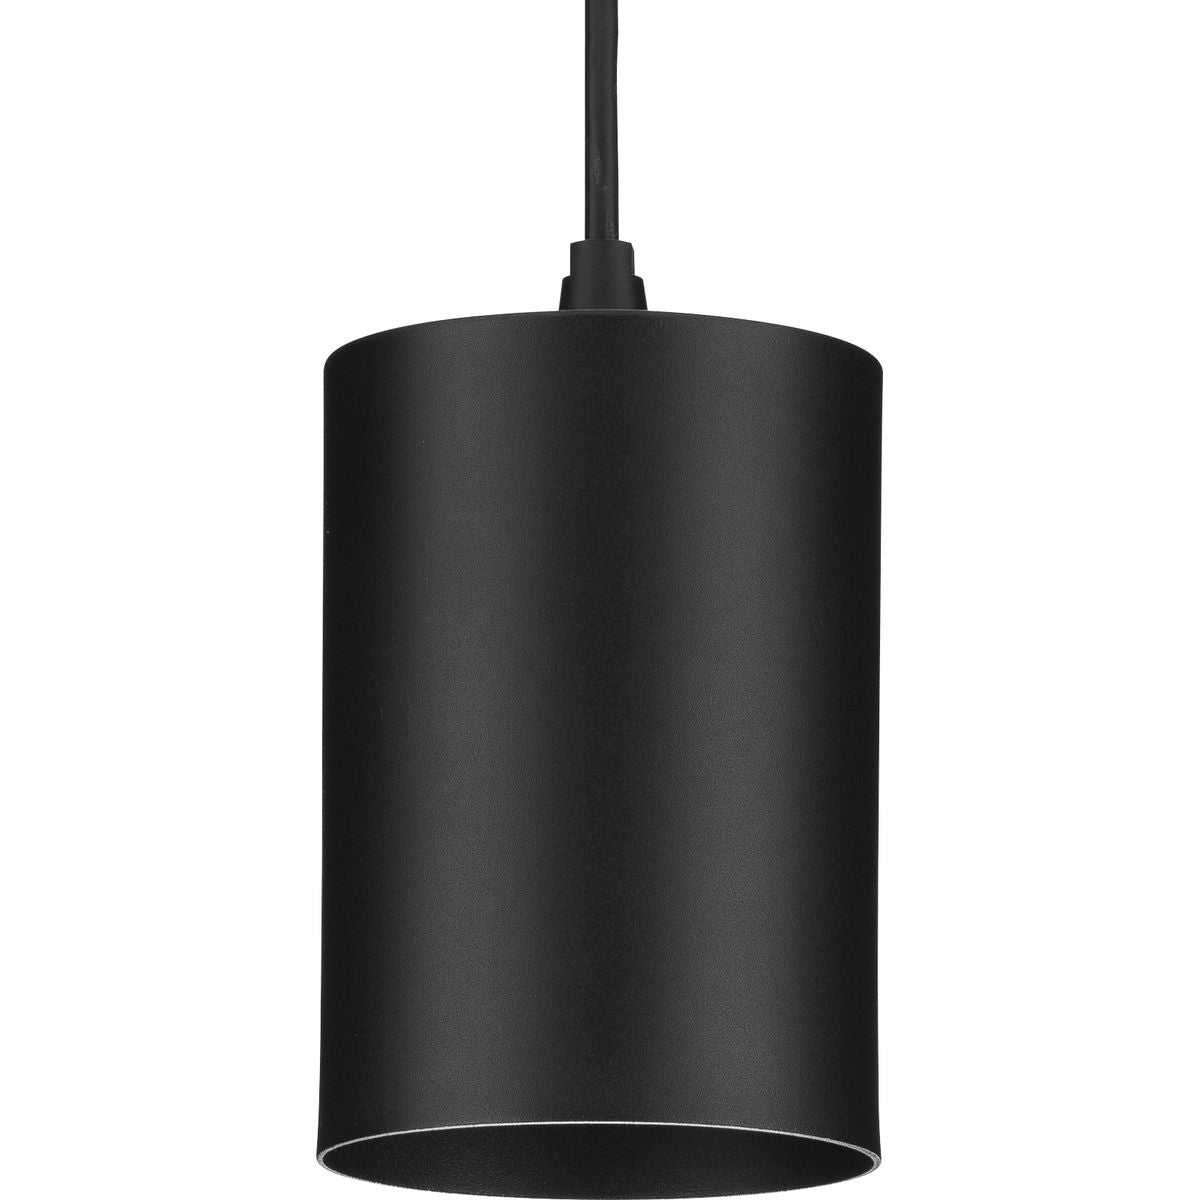 Cyl Rnds 5" Outdoor Pendant